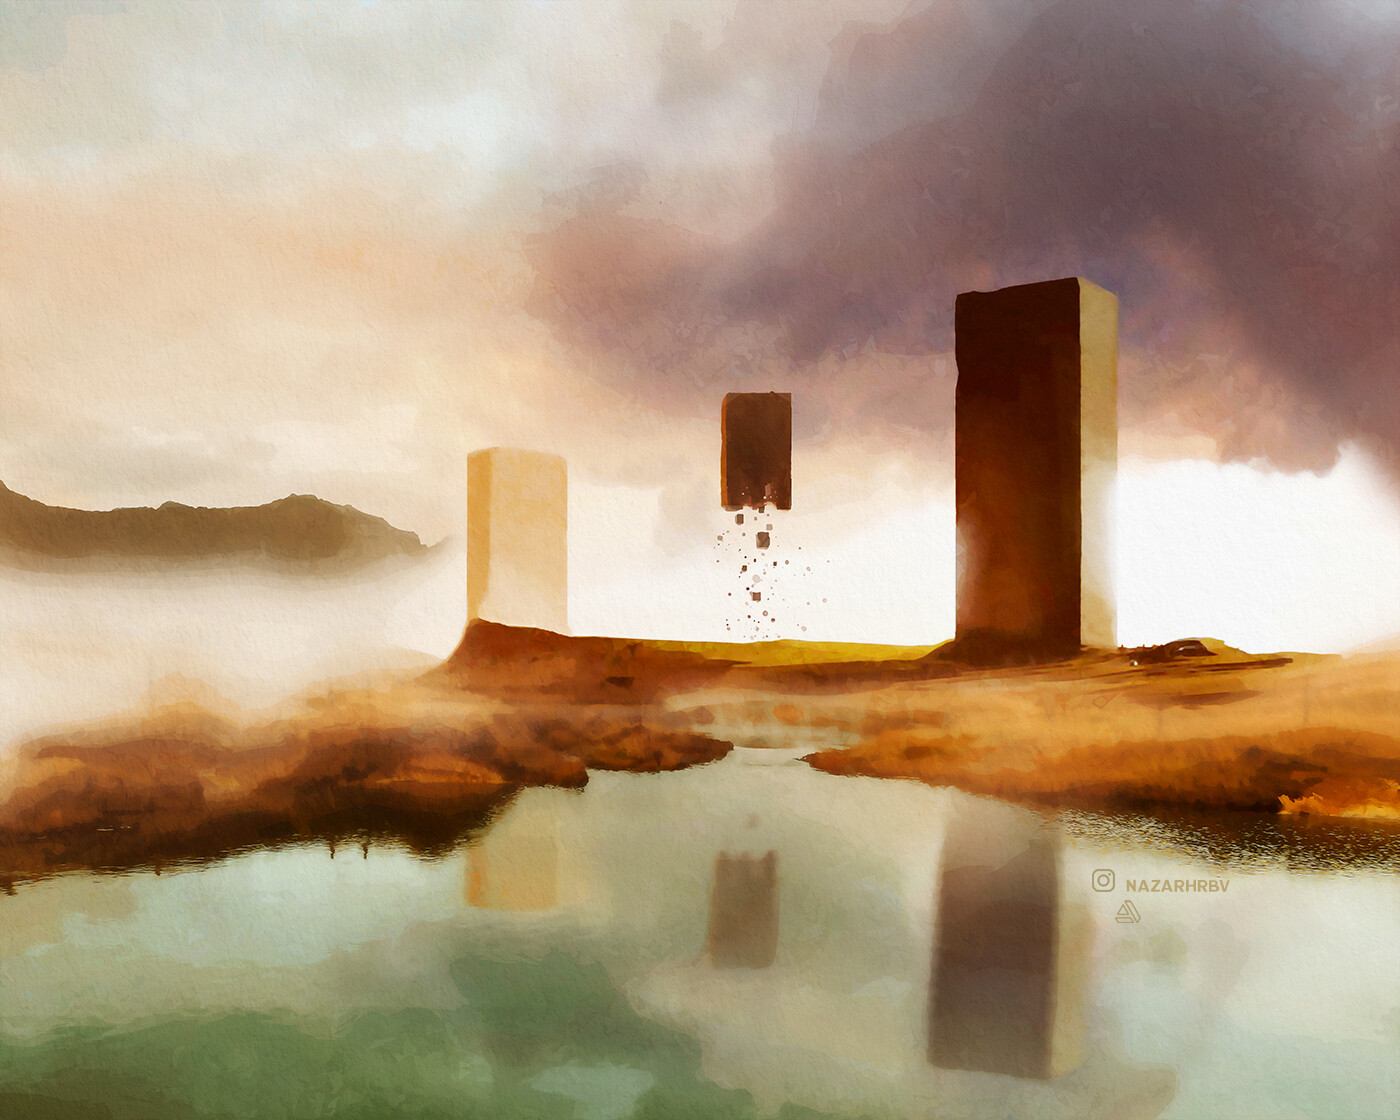 An art piece showing three monolithic structures, and one of them seems to be taking off.